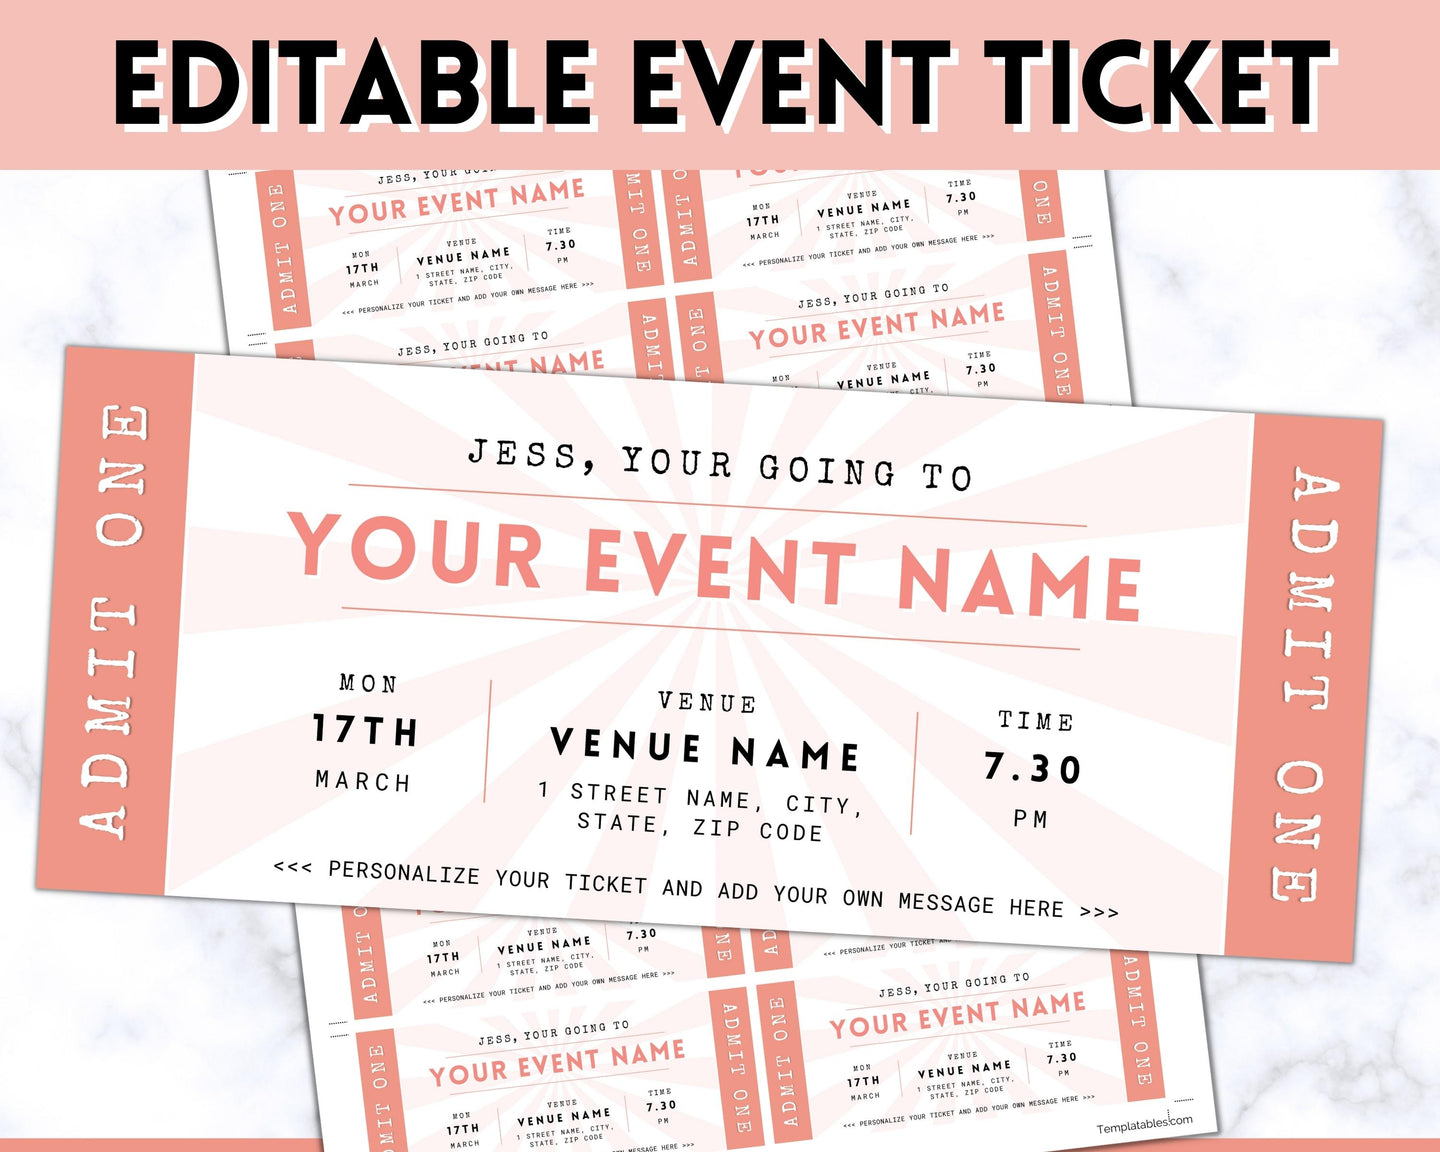 EDITABLE Event Ticket Gift Template | DIY Templates for Concerts, Theatre Shows, Surprise Gifts & Special Occassions | Pink